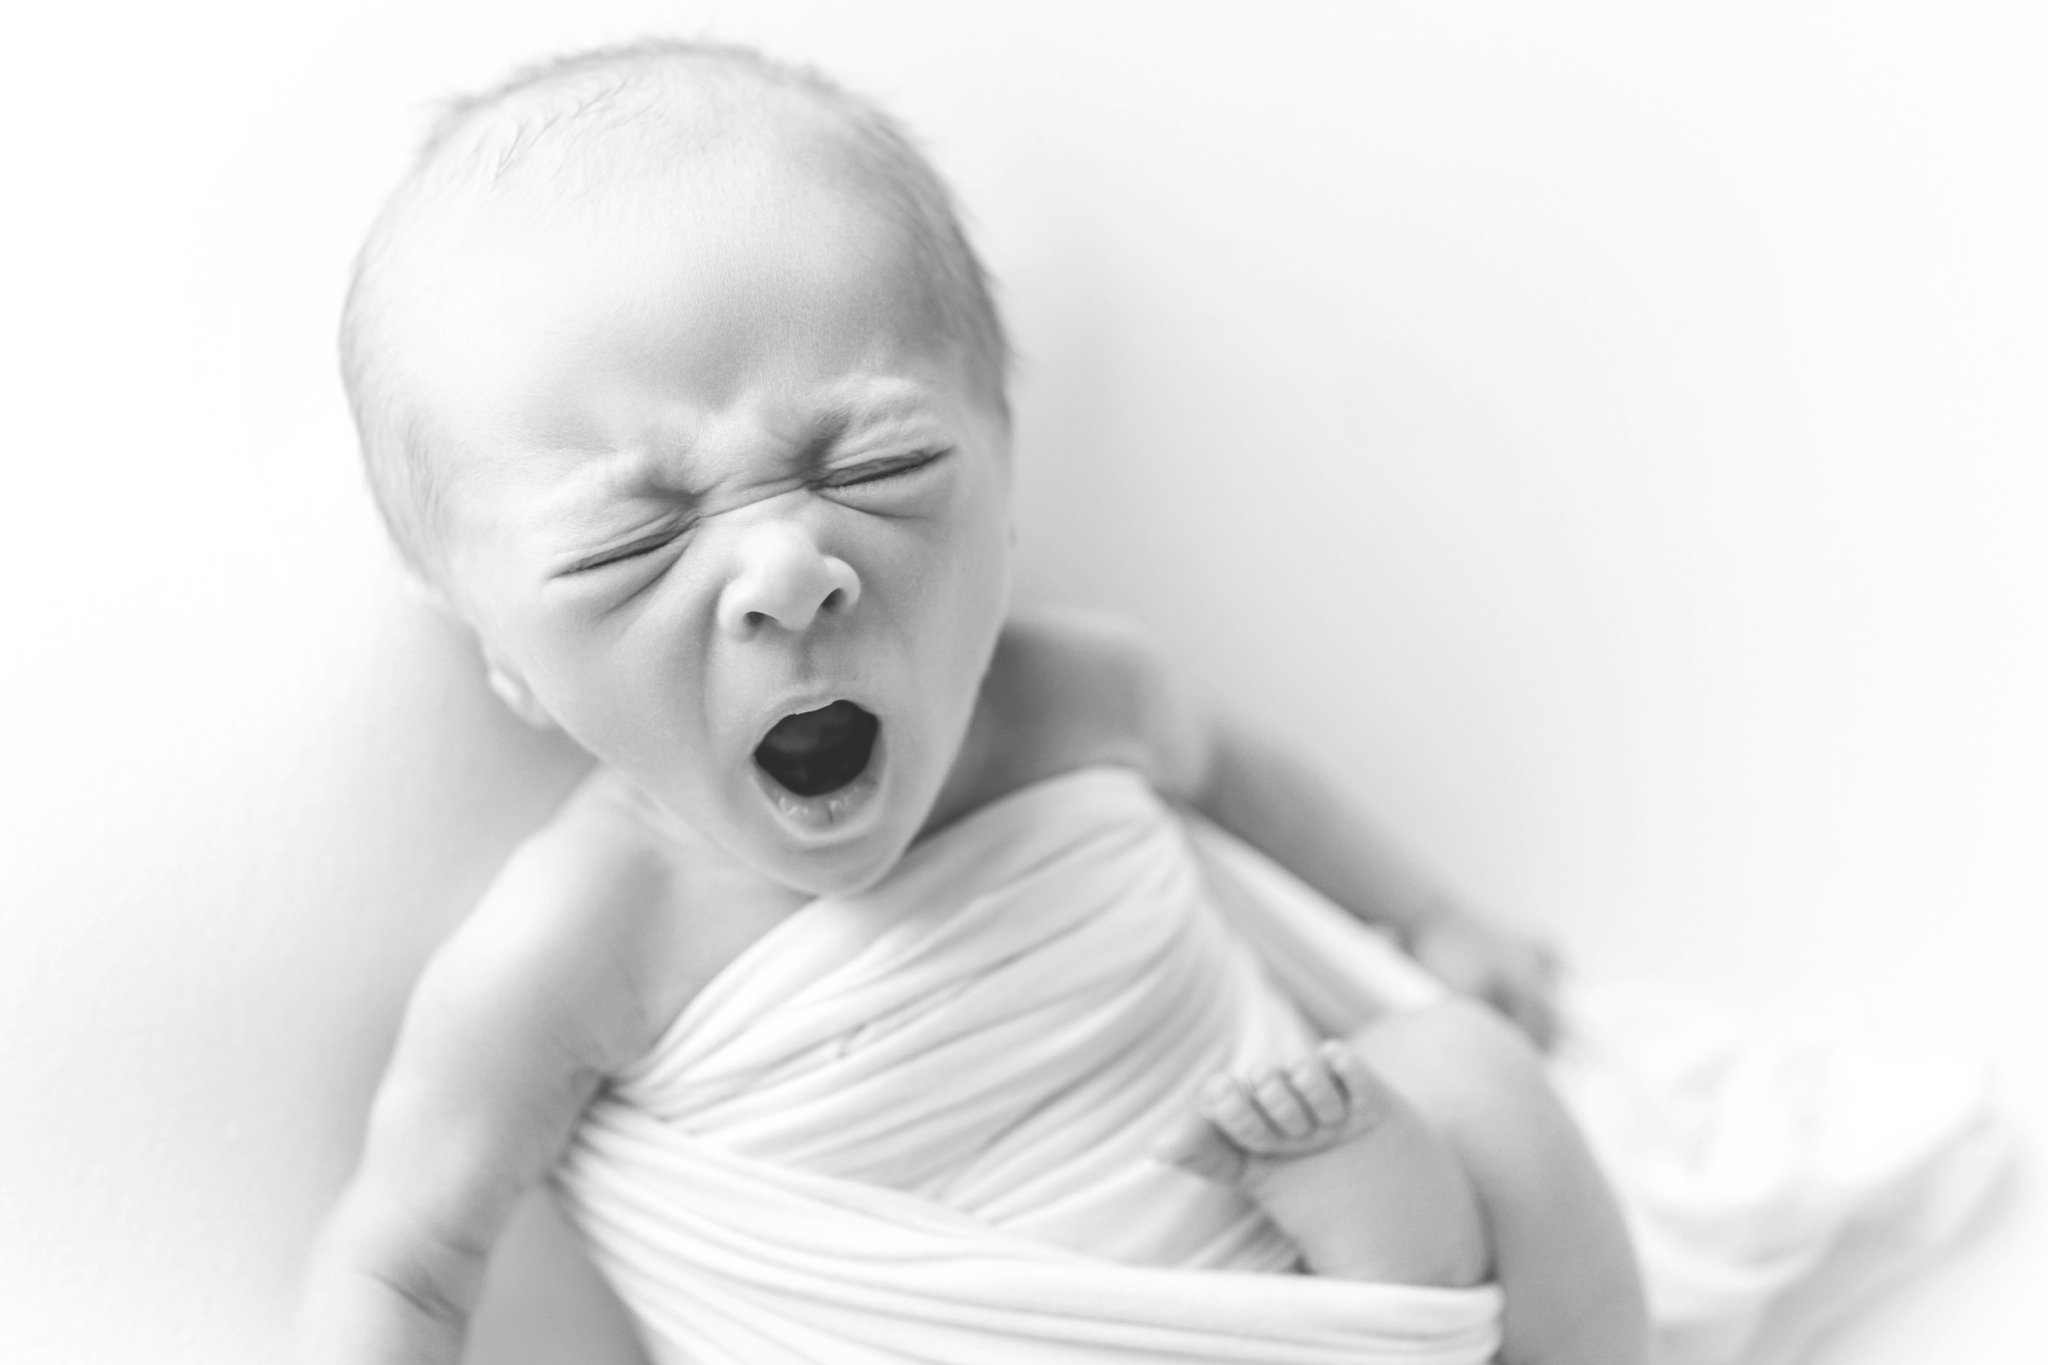 Newborn baby being photographed in south florida photo studio.